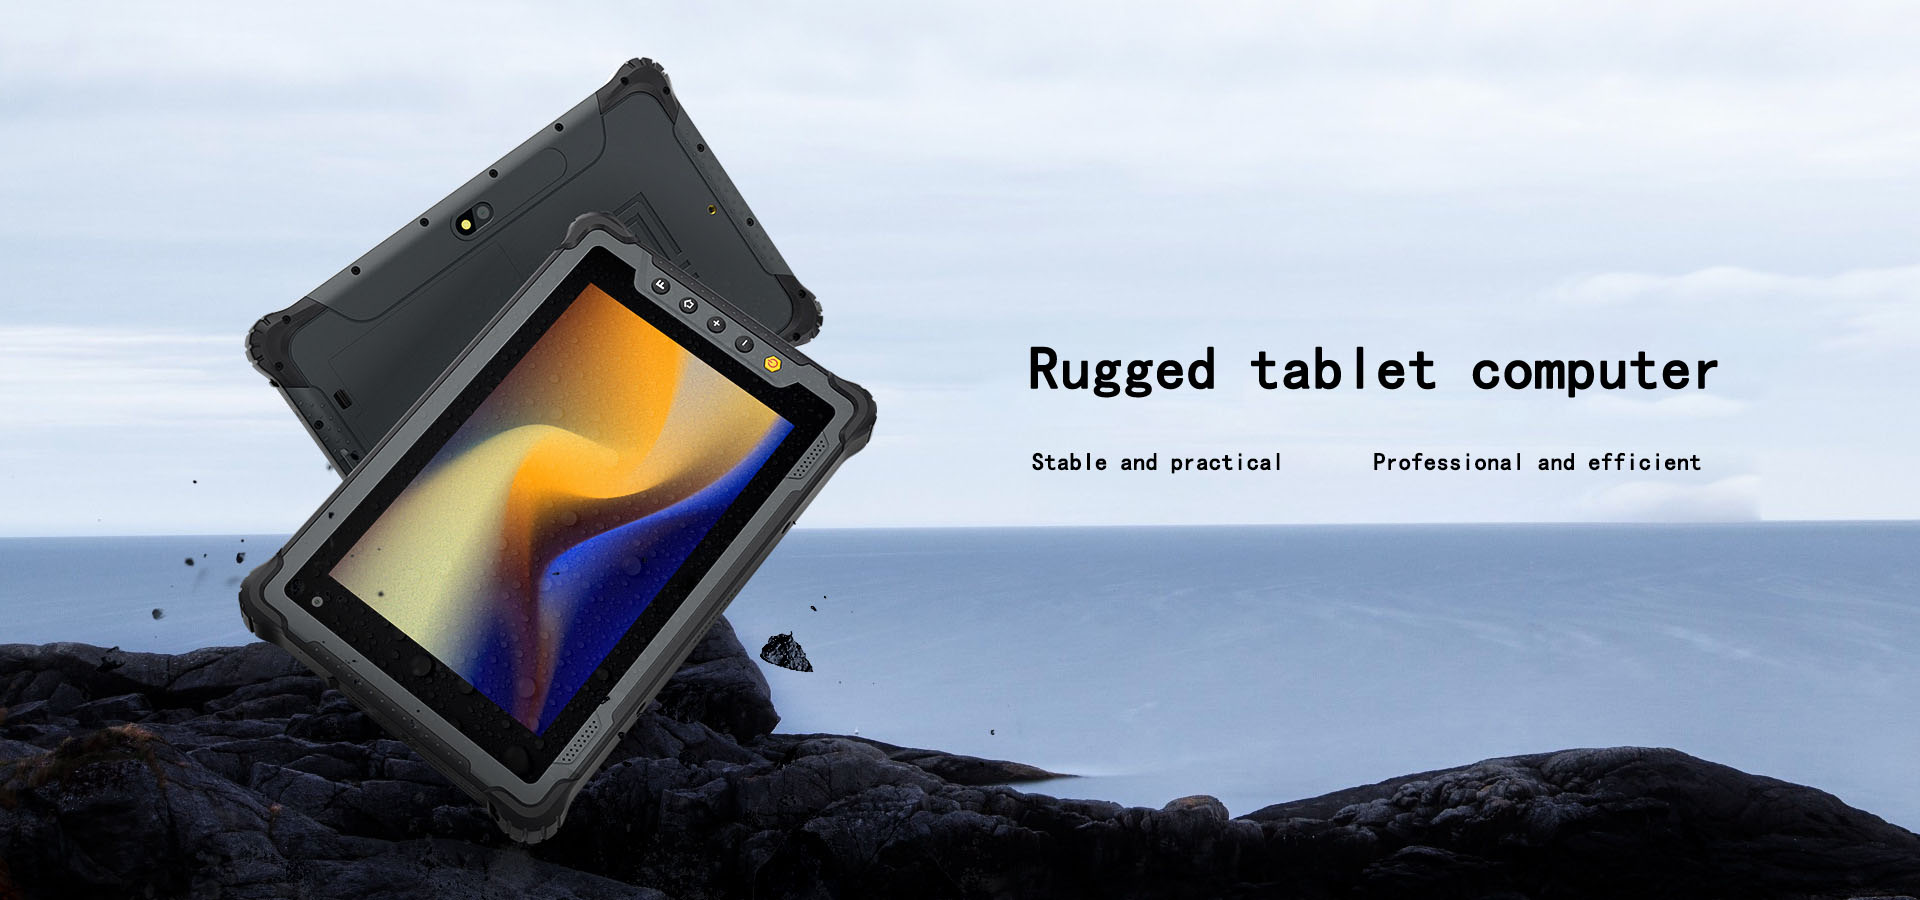 What are the differences between rugged tablets and medical tablets, and are they also suitable for 